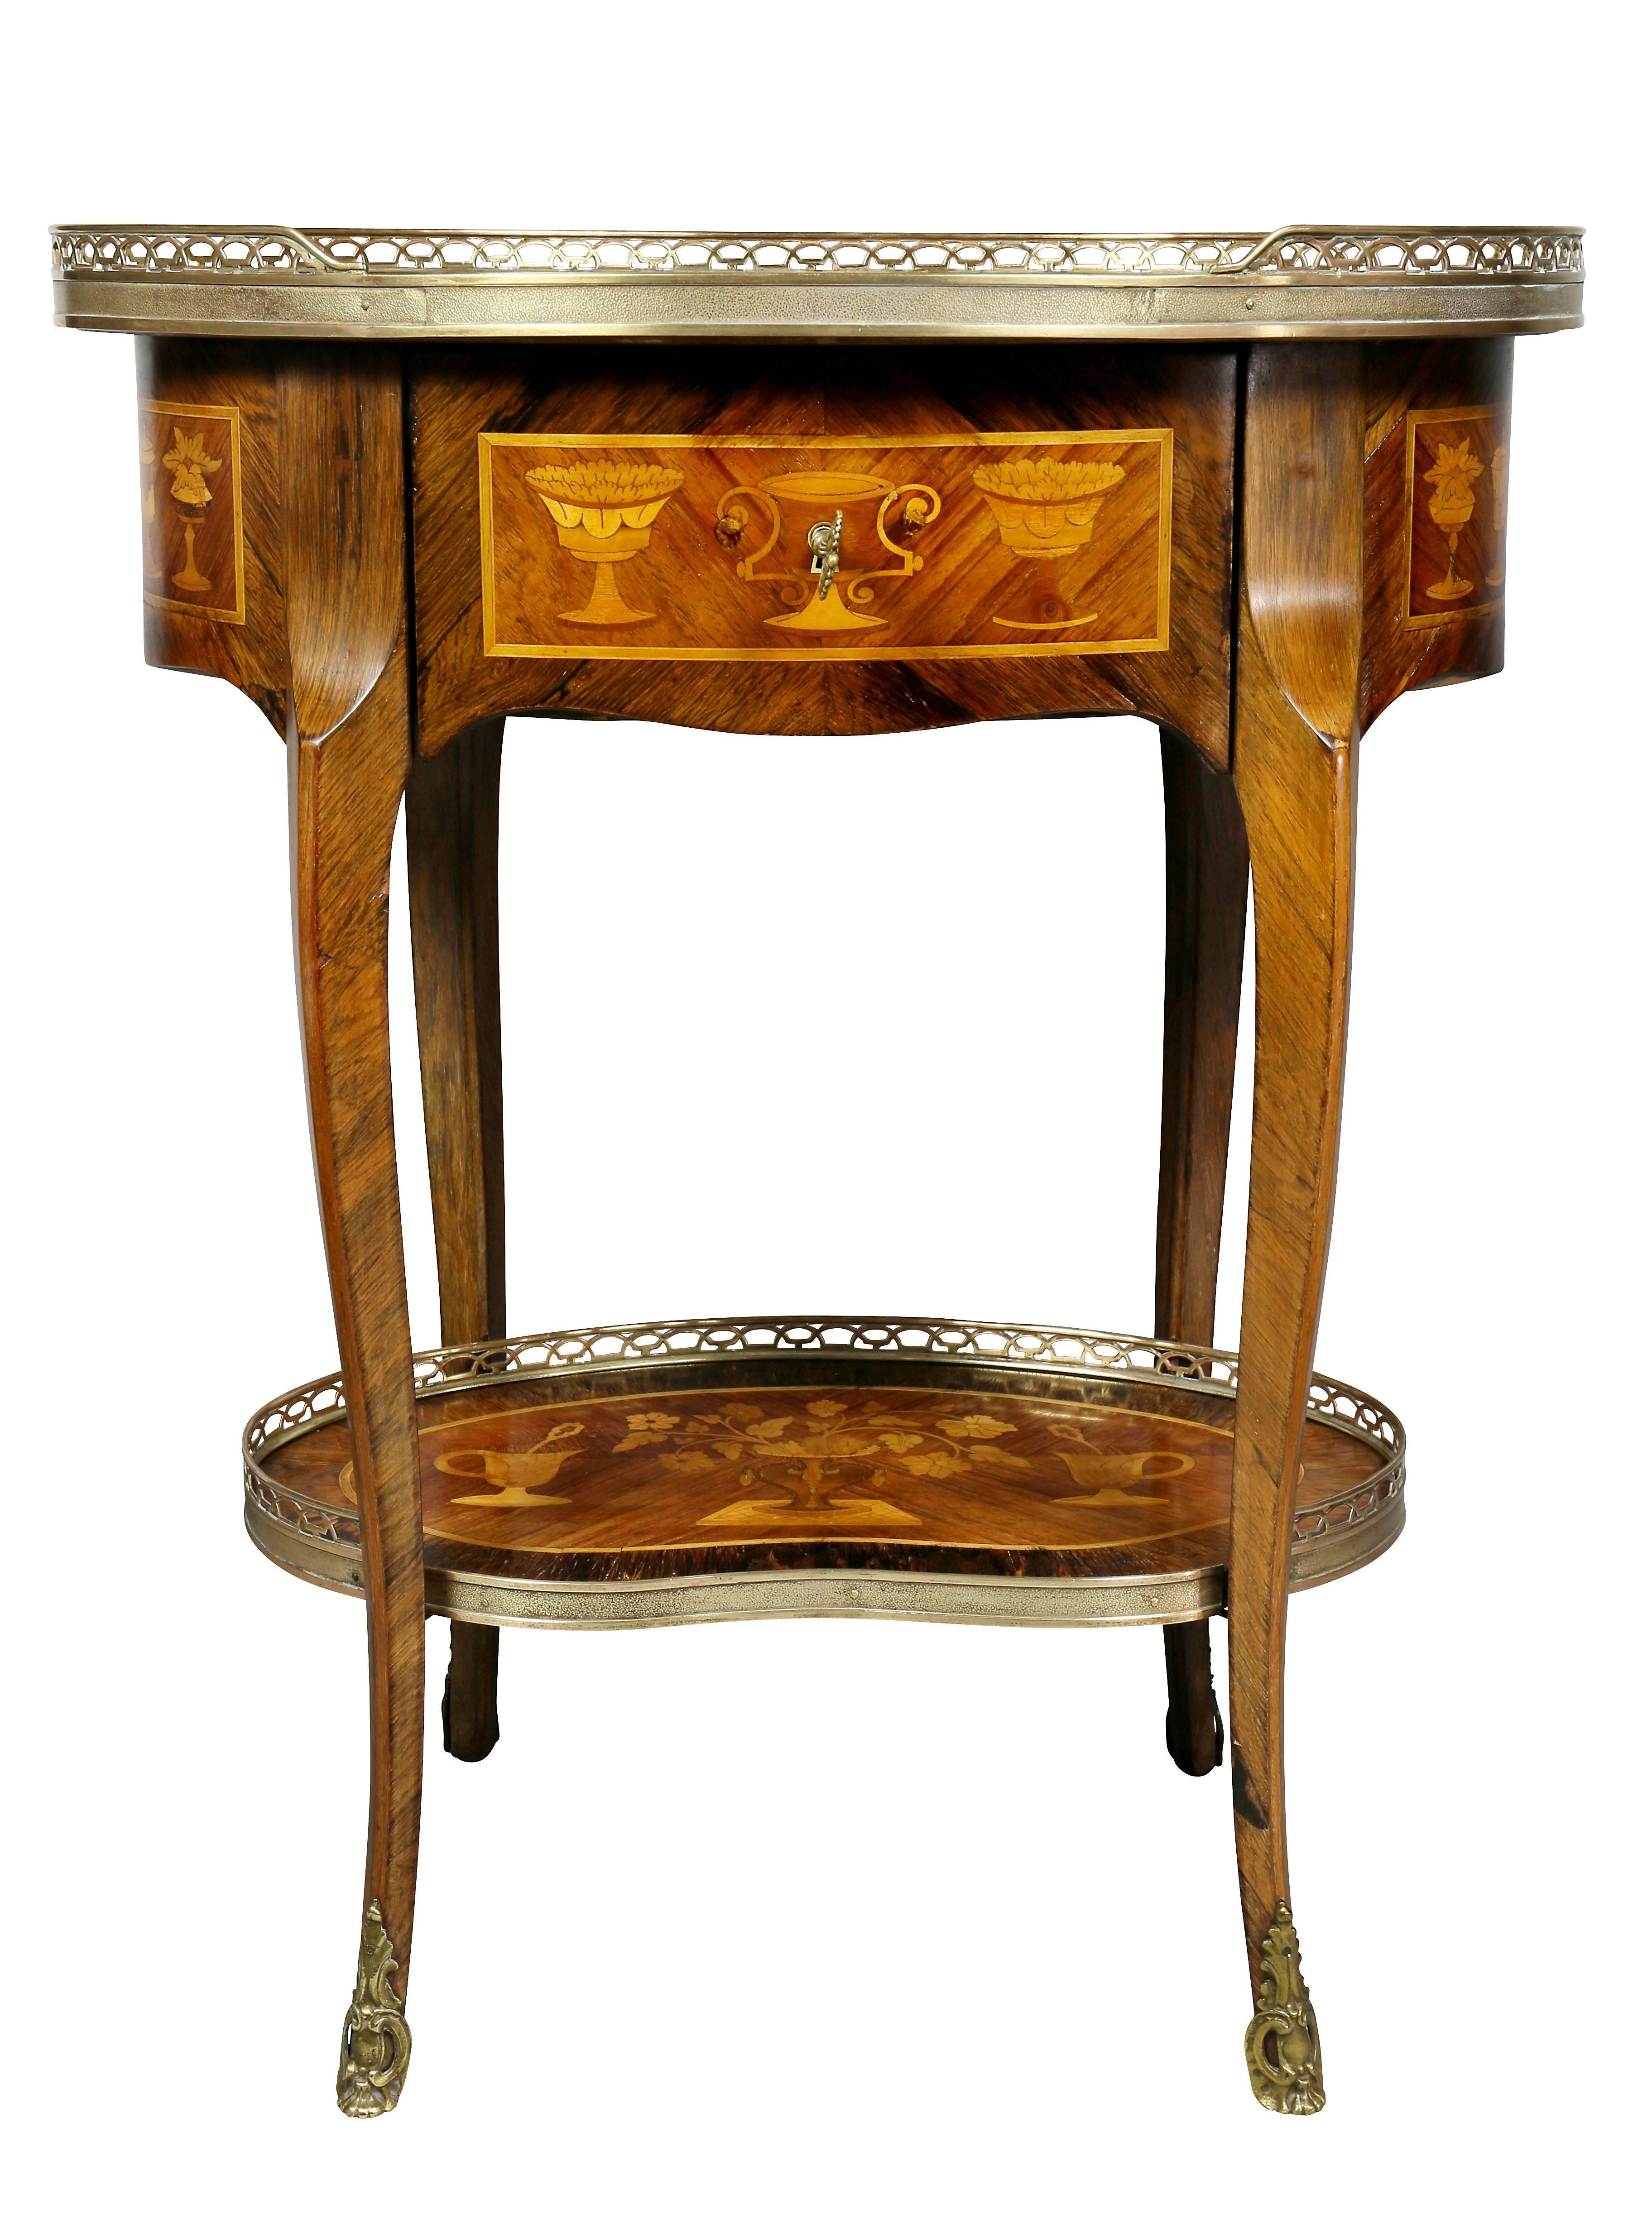 Oval top with inlays and brass gallery over a drawer with all around inlays, raised on shaped cabriole legs and a lower shelf, sabot feet.